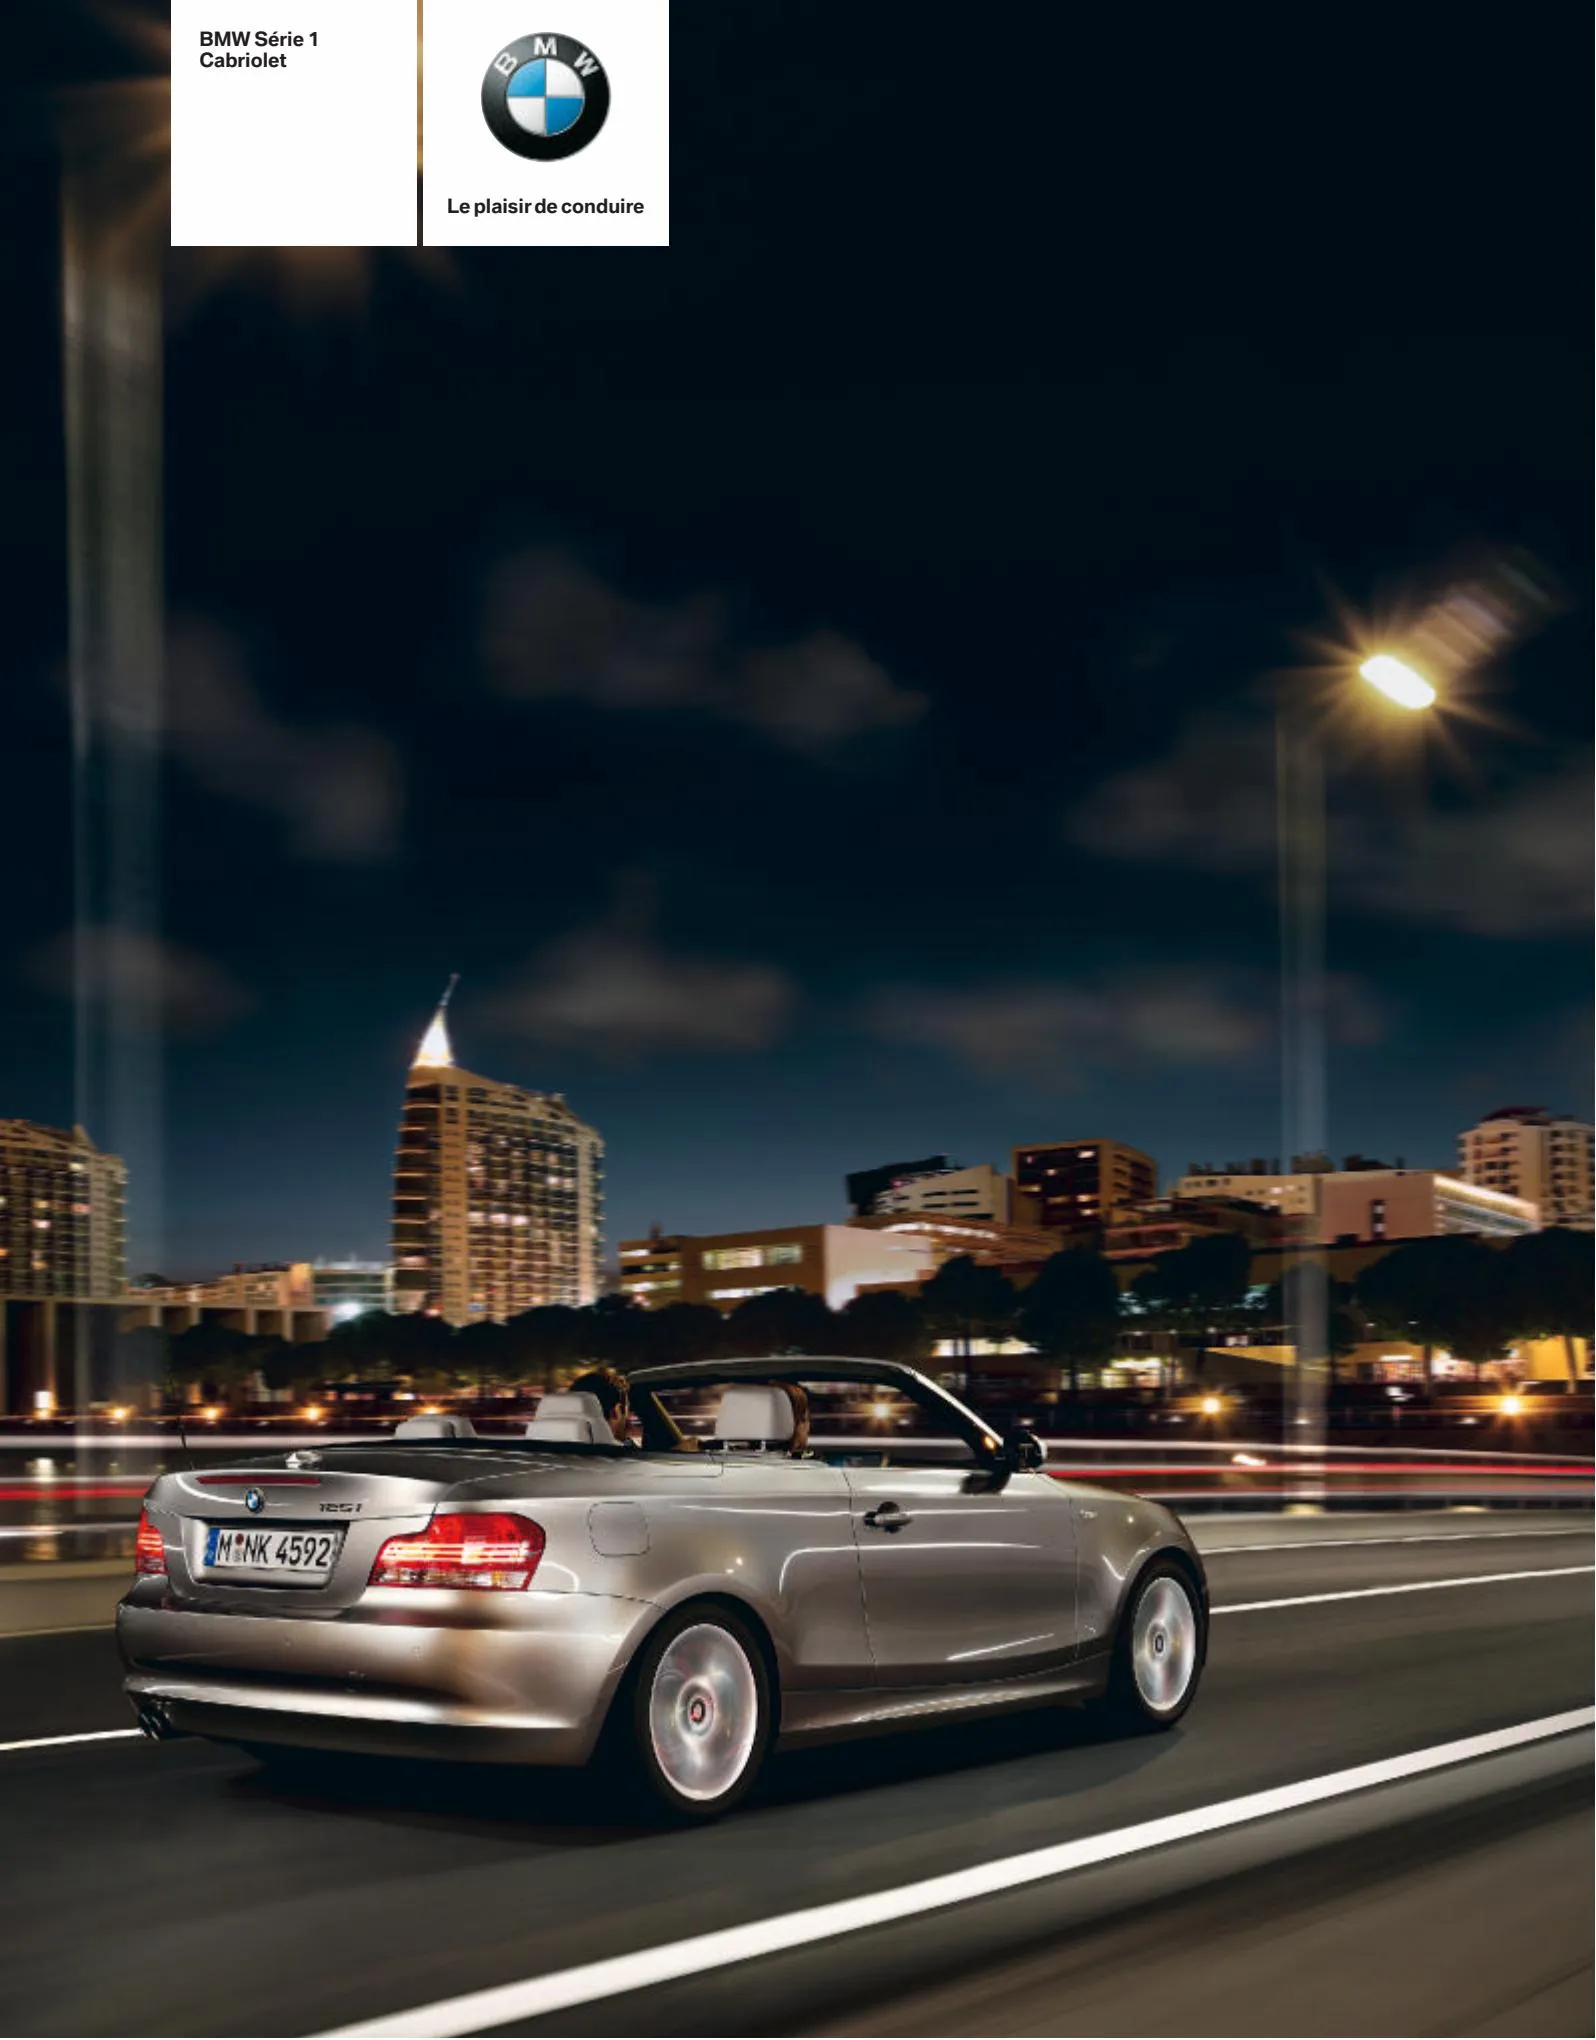 Catalogue BMW Serie1 Cabriolet, page 00001